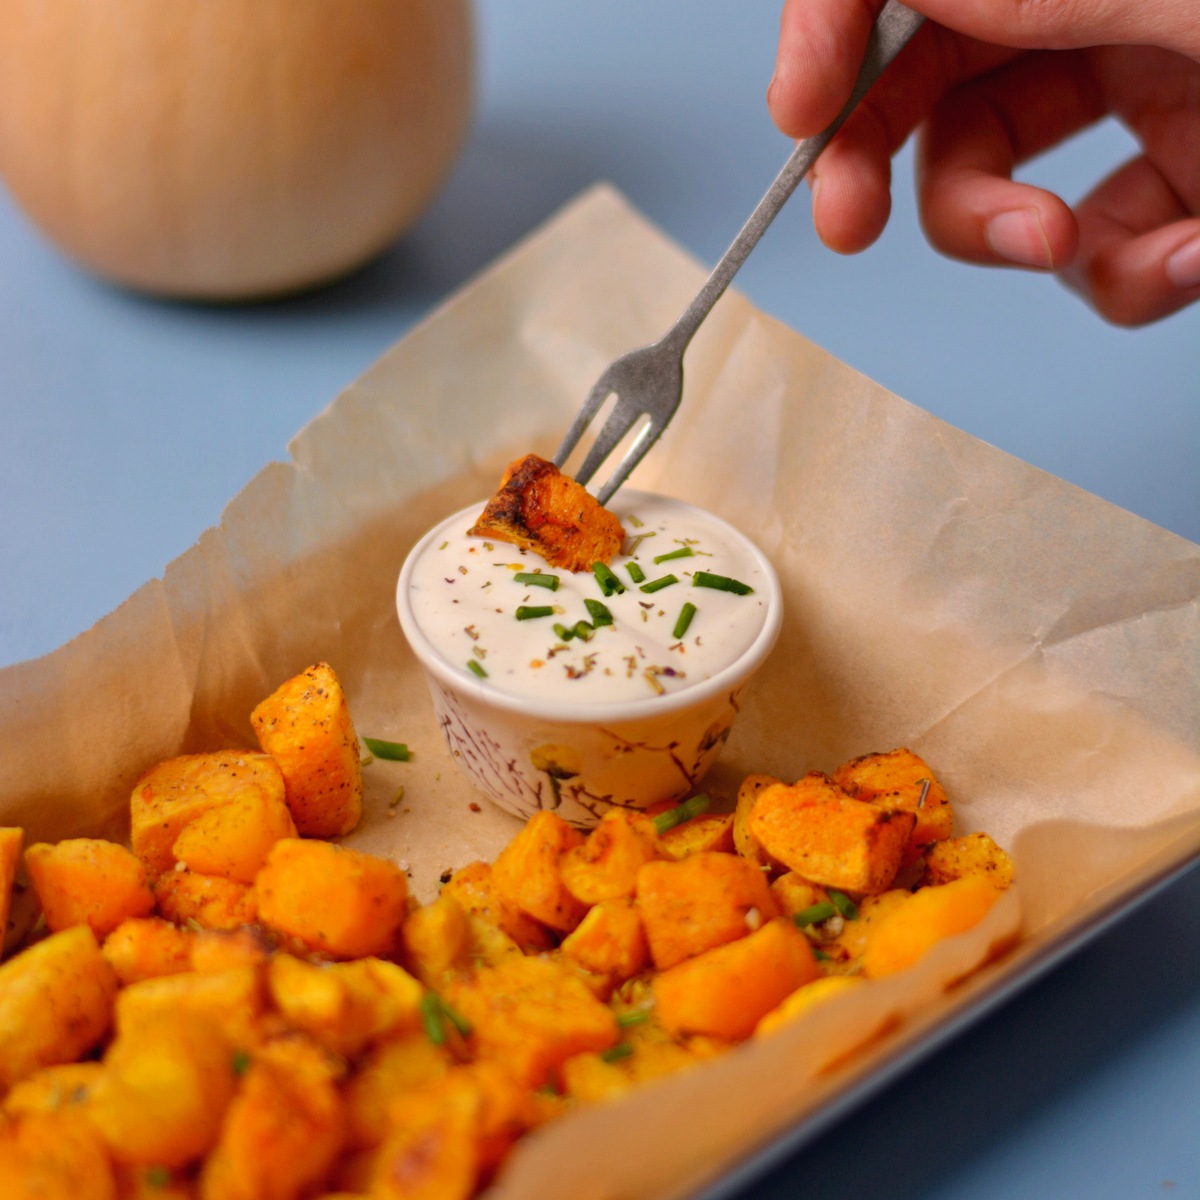 A fork dipping a butternut squash cube into ranch dressing.